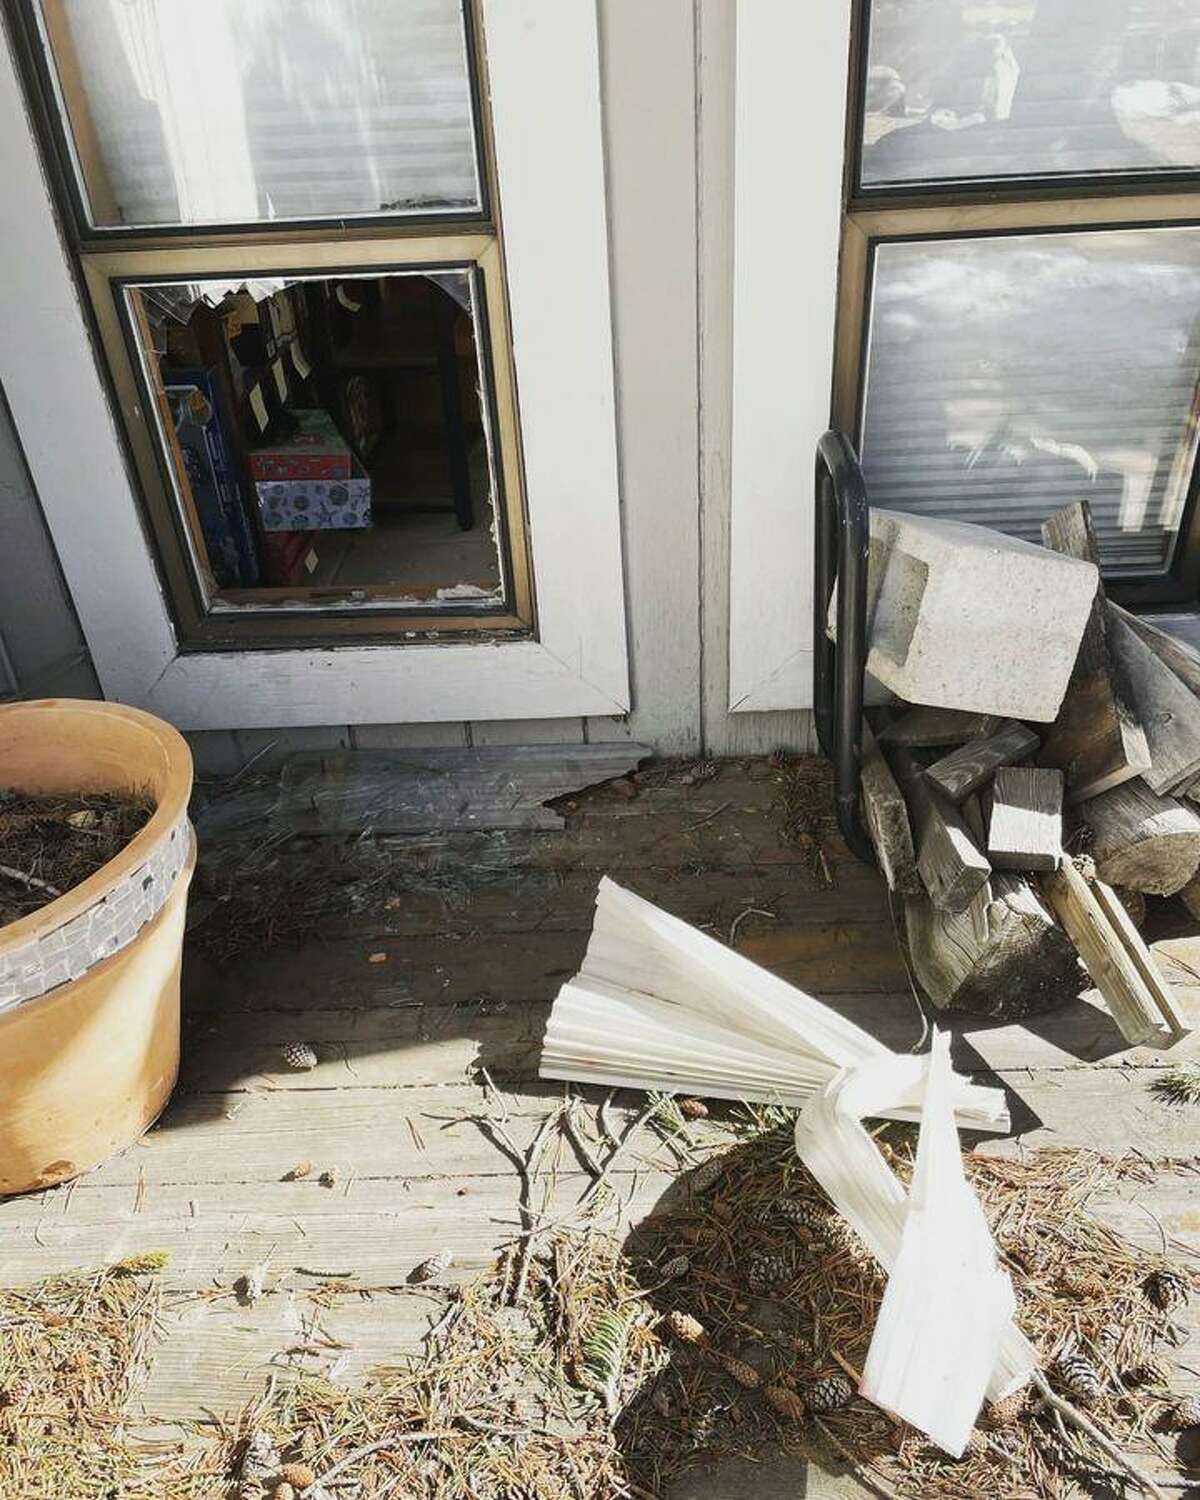 Damage done by the bear known as Hank the Tank to a home in the Tahoe Keys neighborhood.